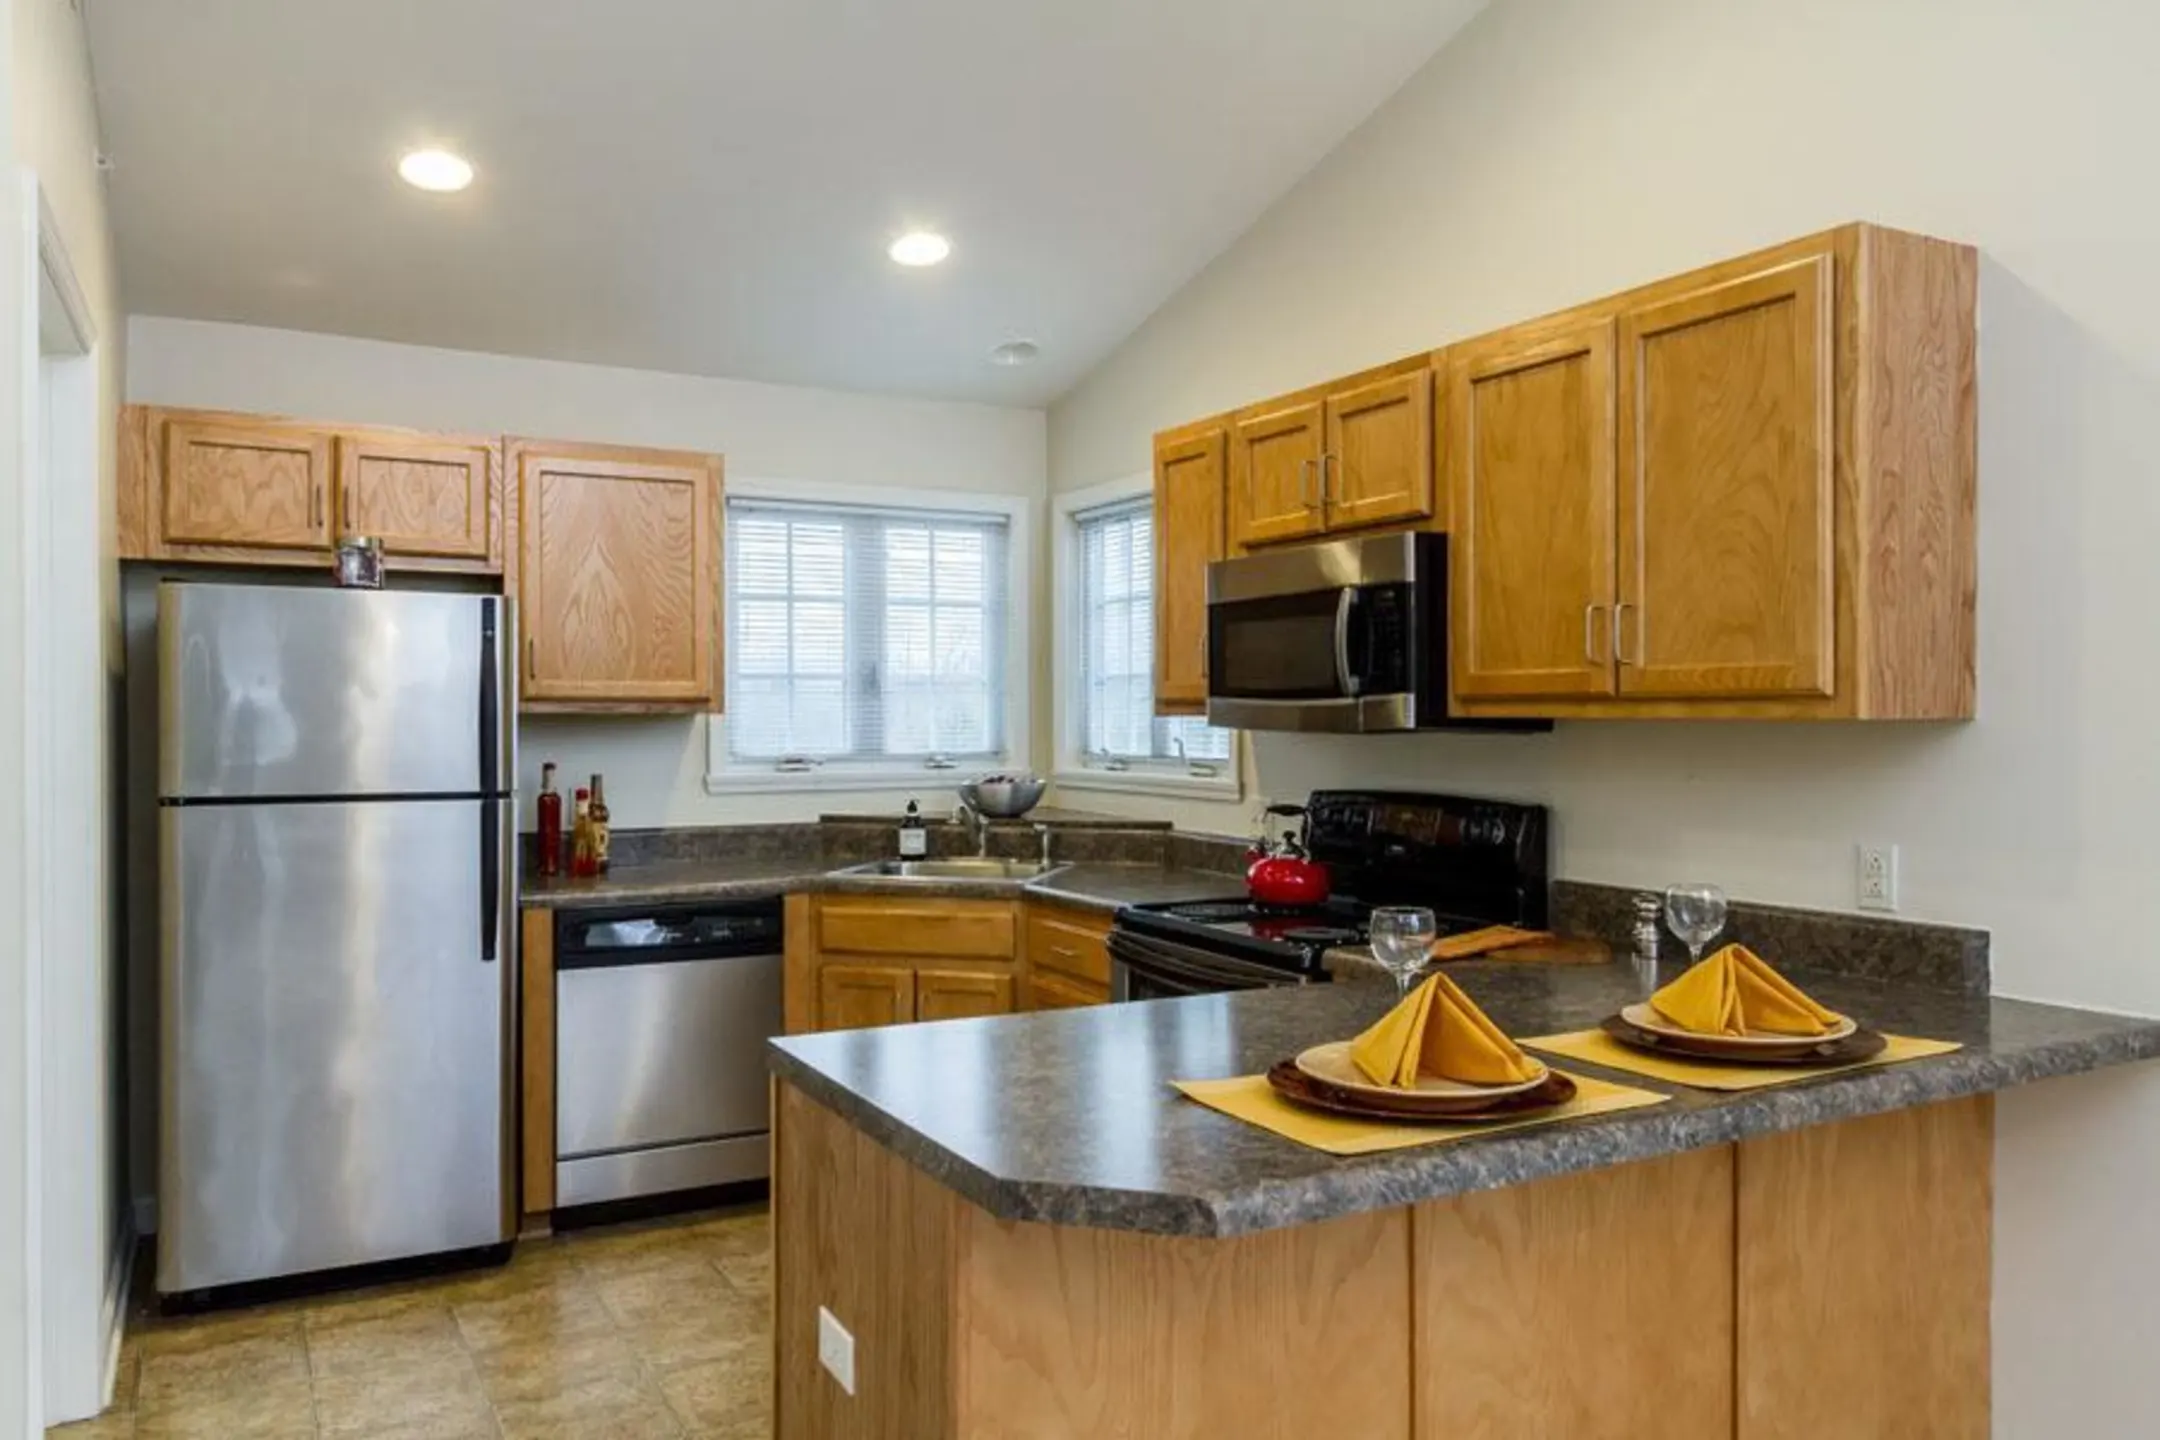 Kitchen - Regency Townhomes of Victor/ Villas of Victor - Victor, NY